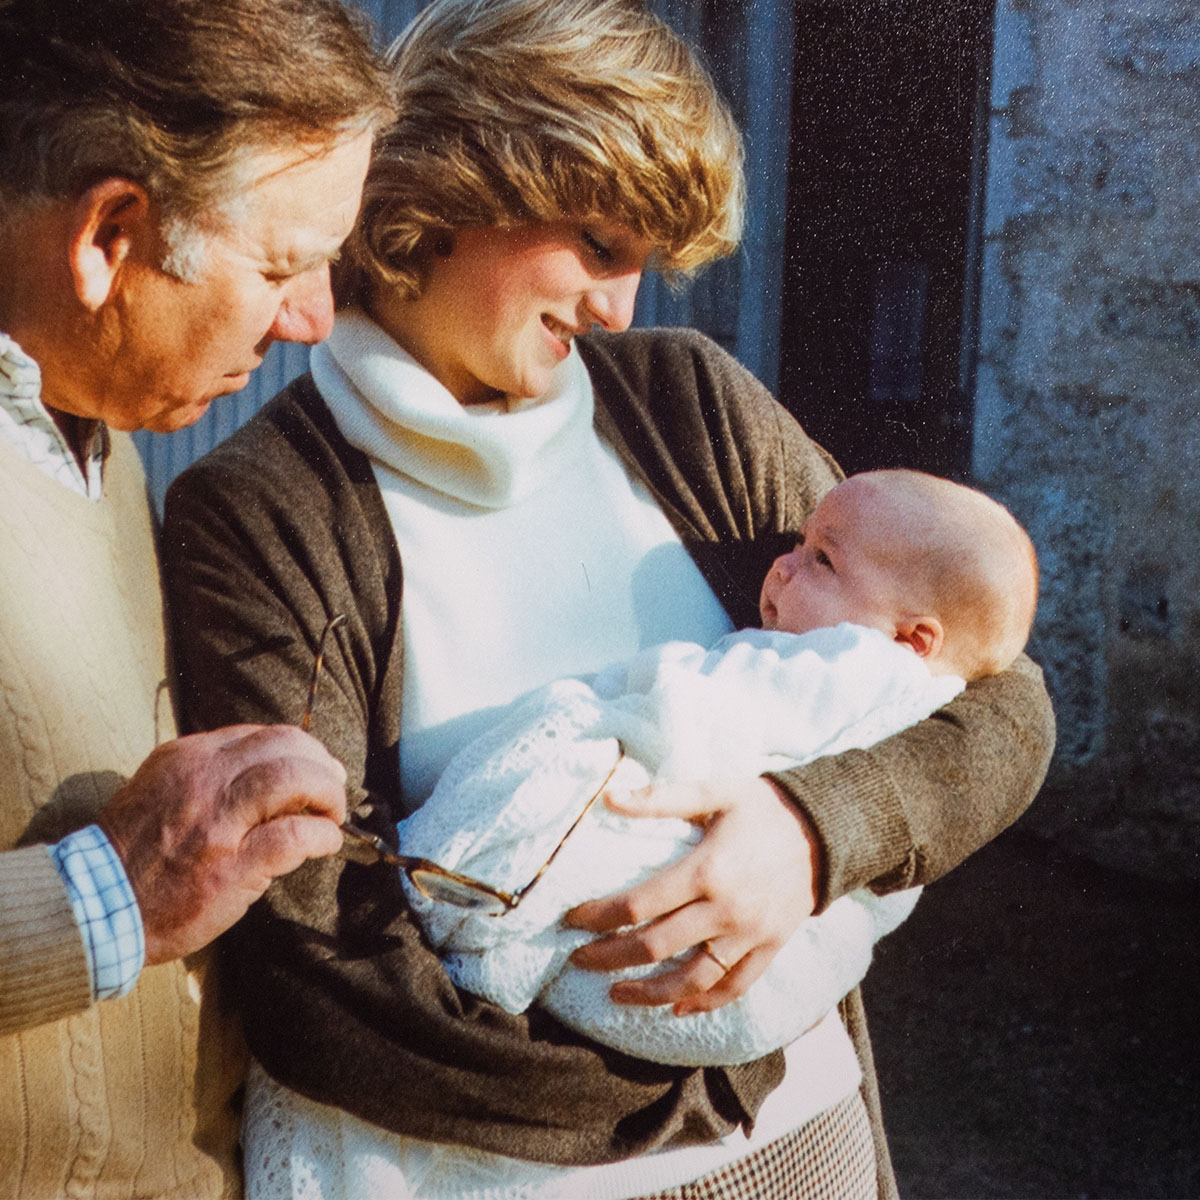 Princess Diana Appears with Baby Prince William and King Charles in Never-Before-Seen Photos – E! Online